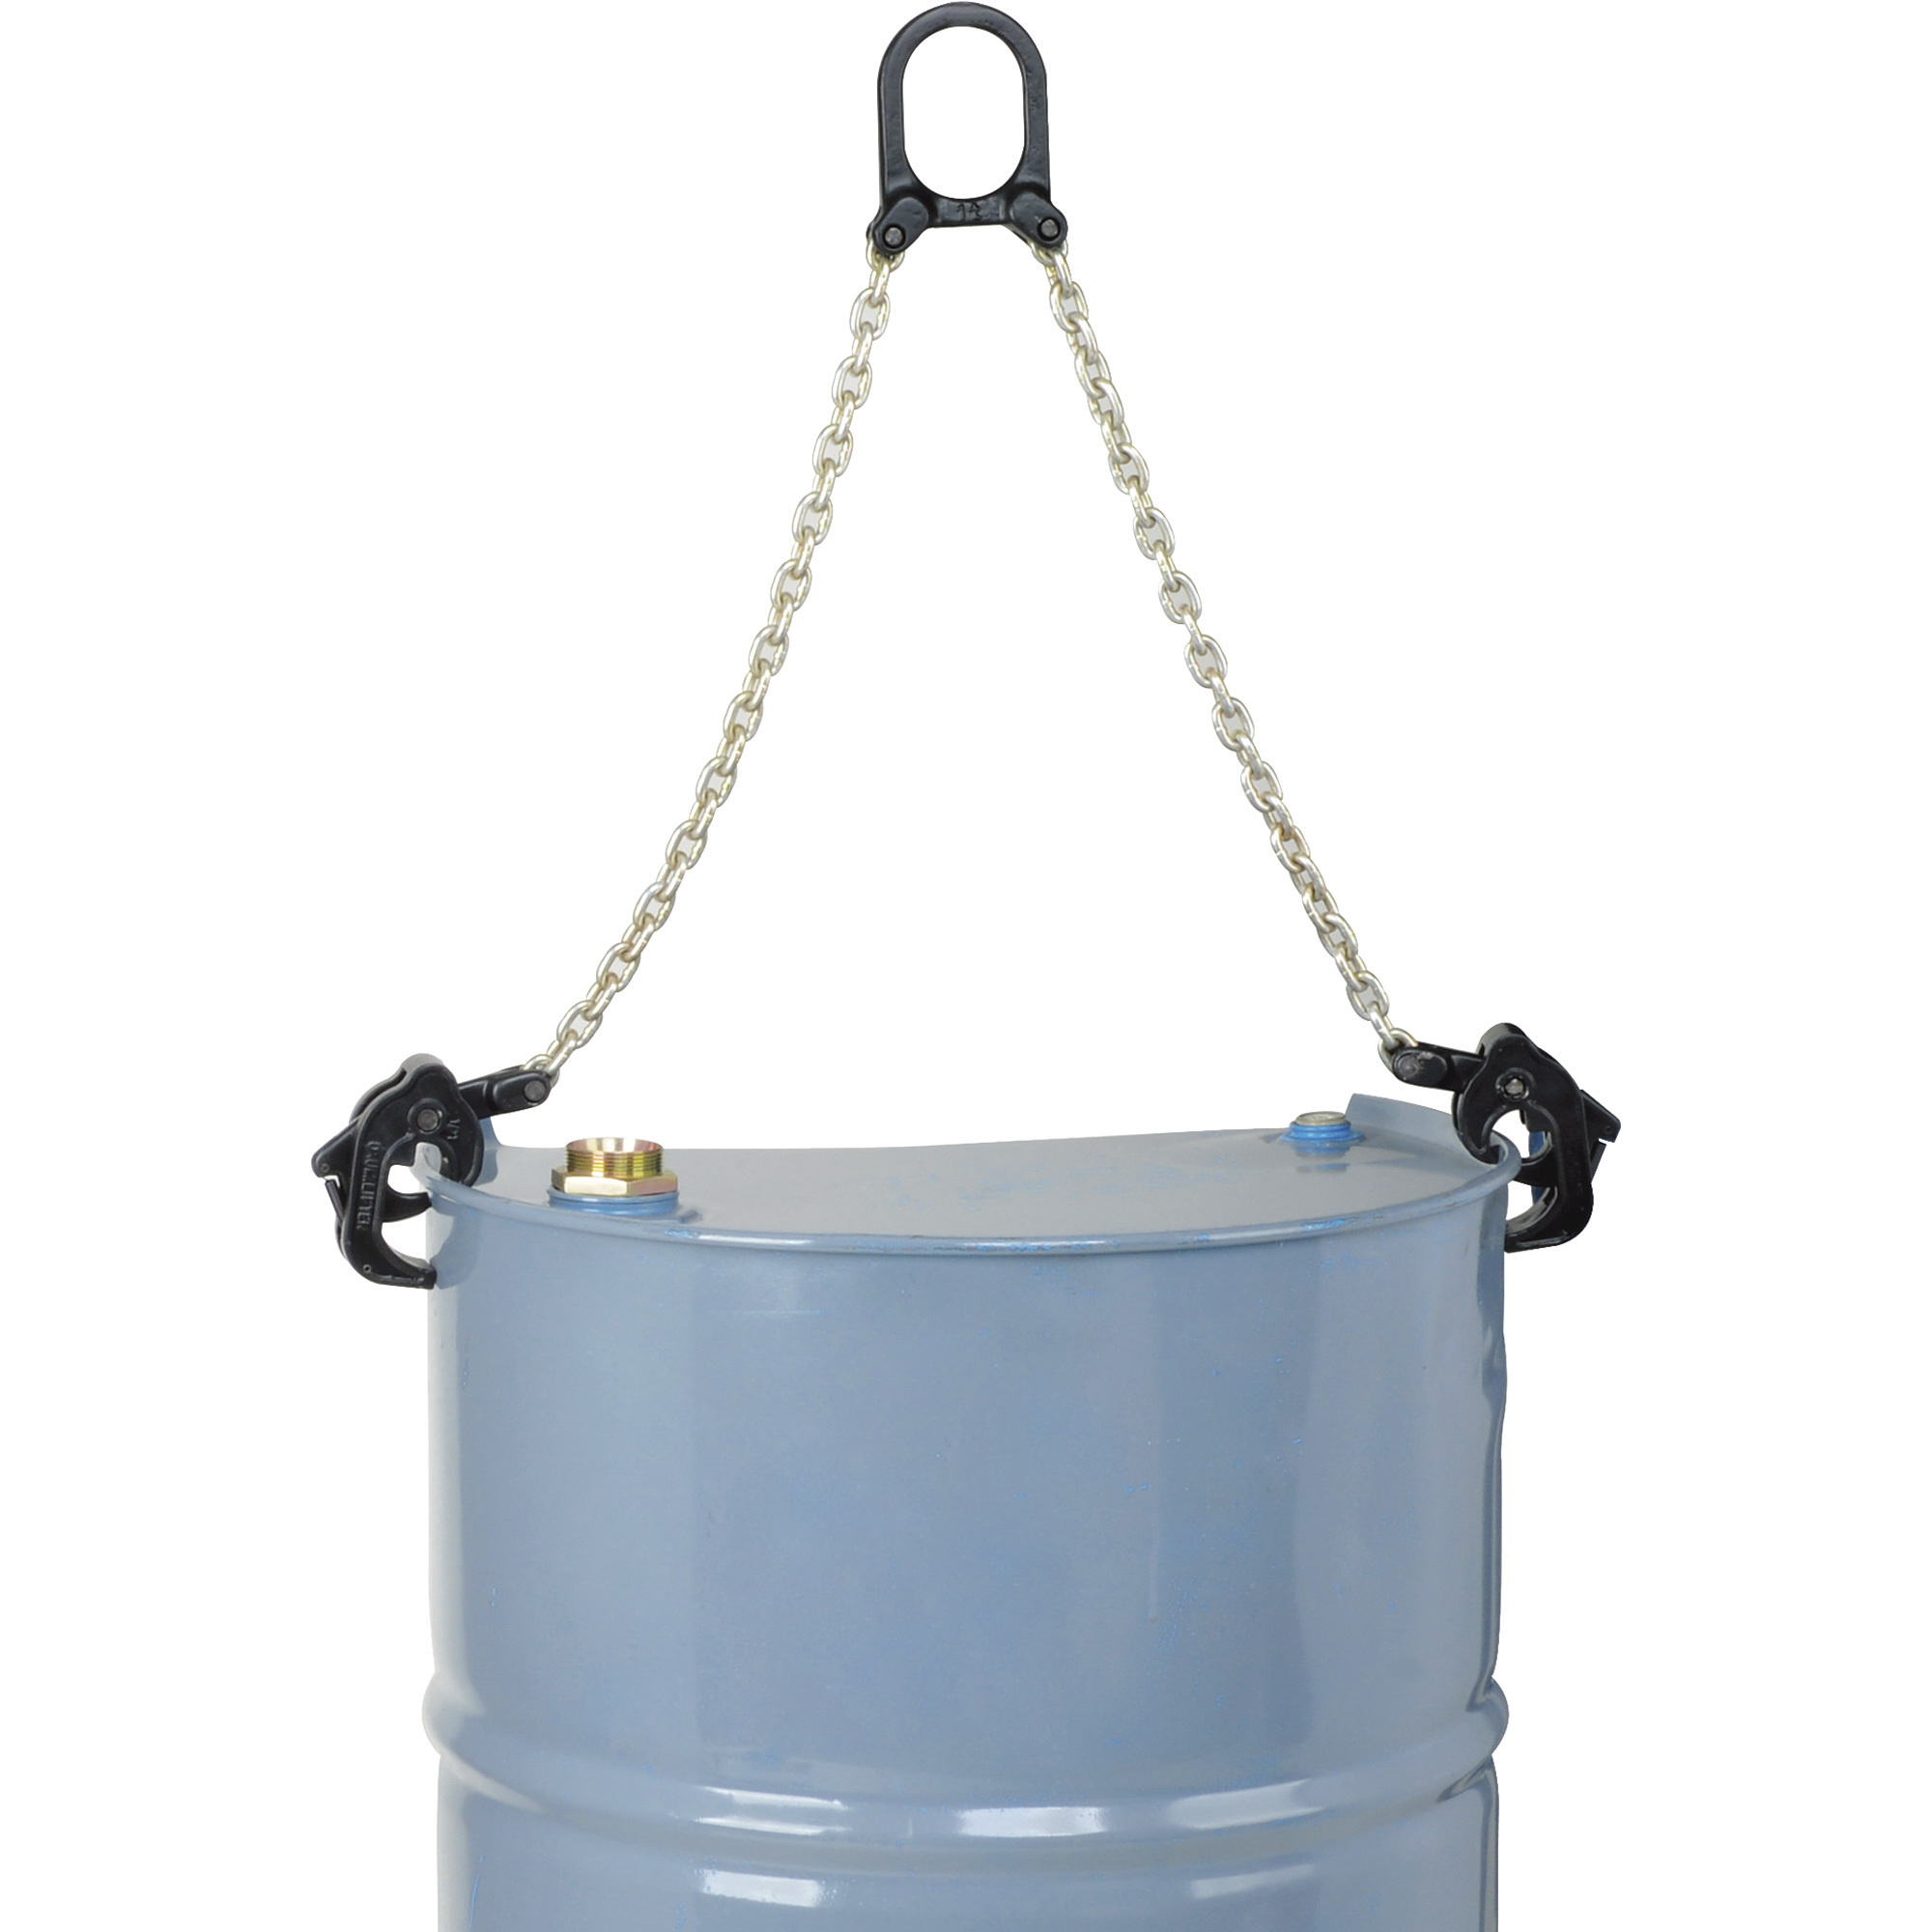 Strongway Vertical Drum Lifter, 2000-Lb. Capacity